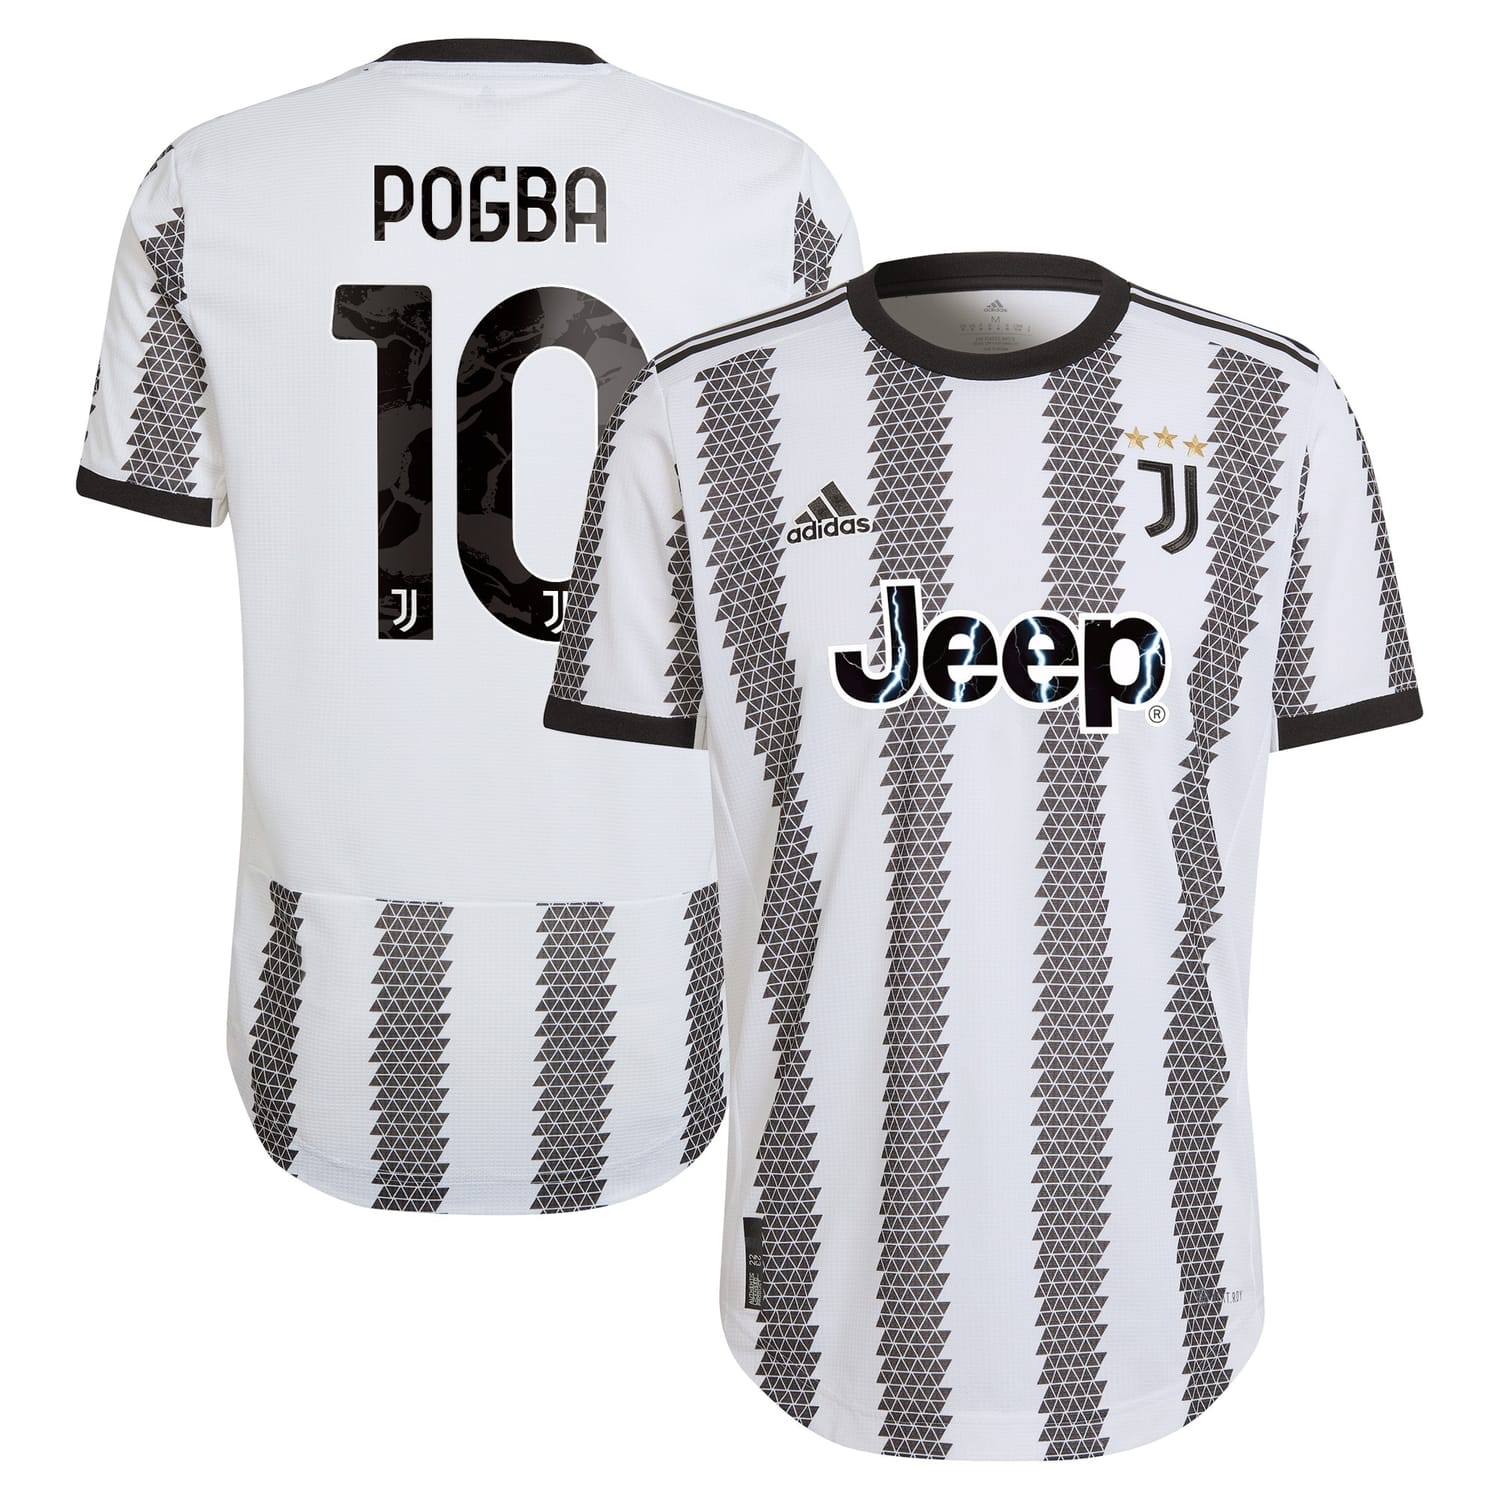 Serie A Juventus Home Authentic Jersey Shirt 2022-23 player Paul Pogba 10 printing for Men